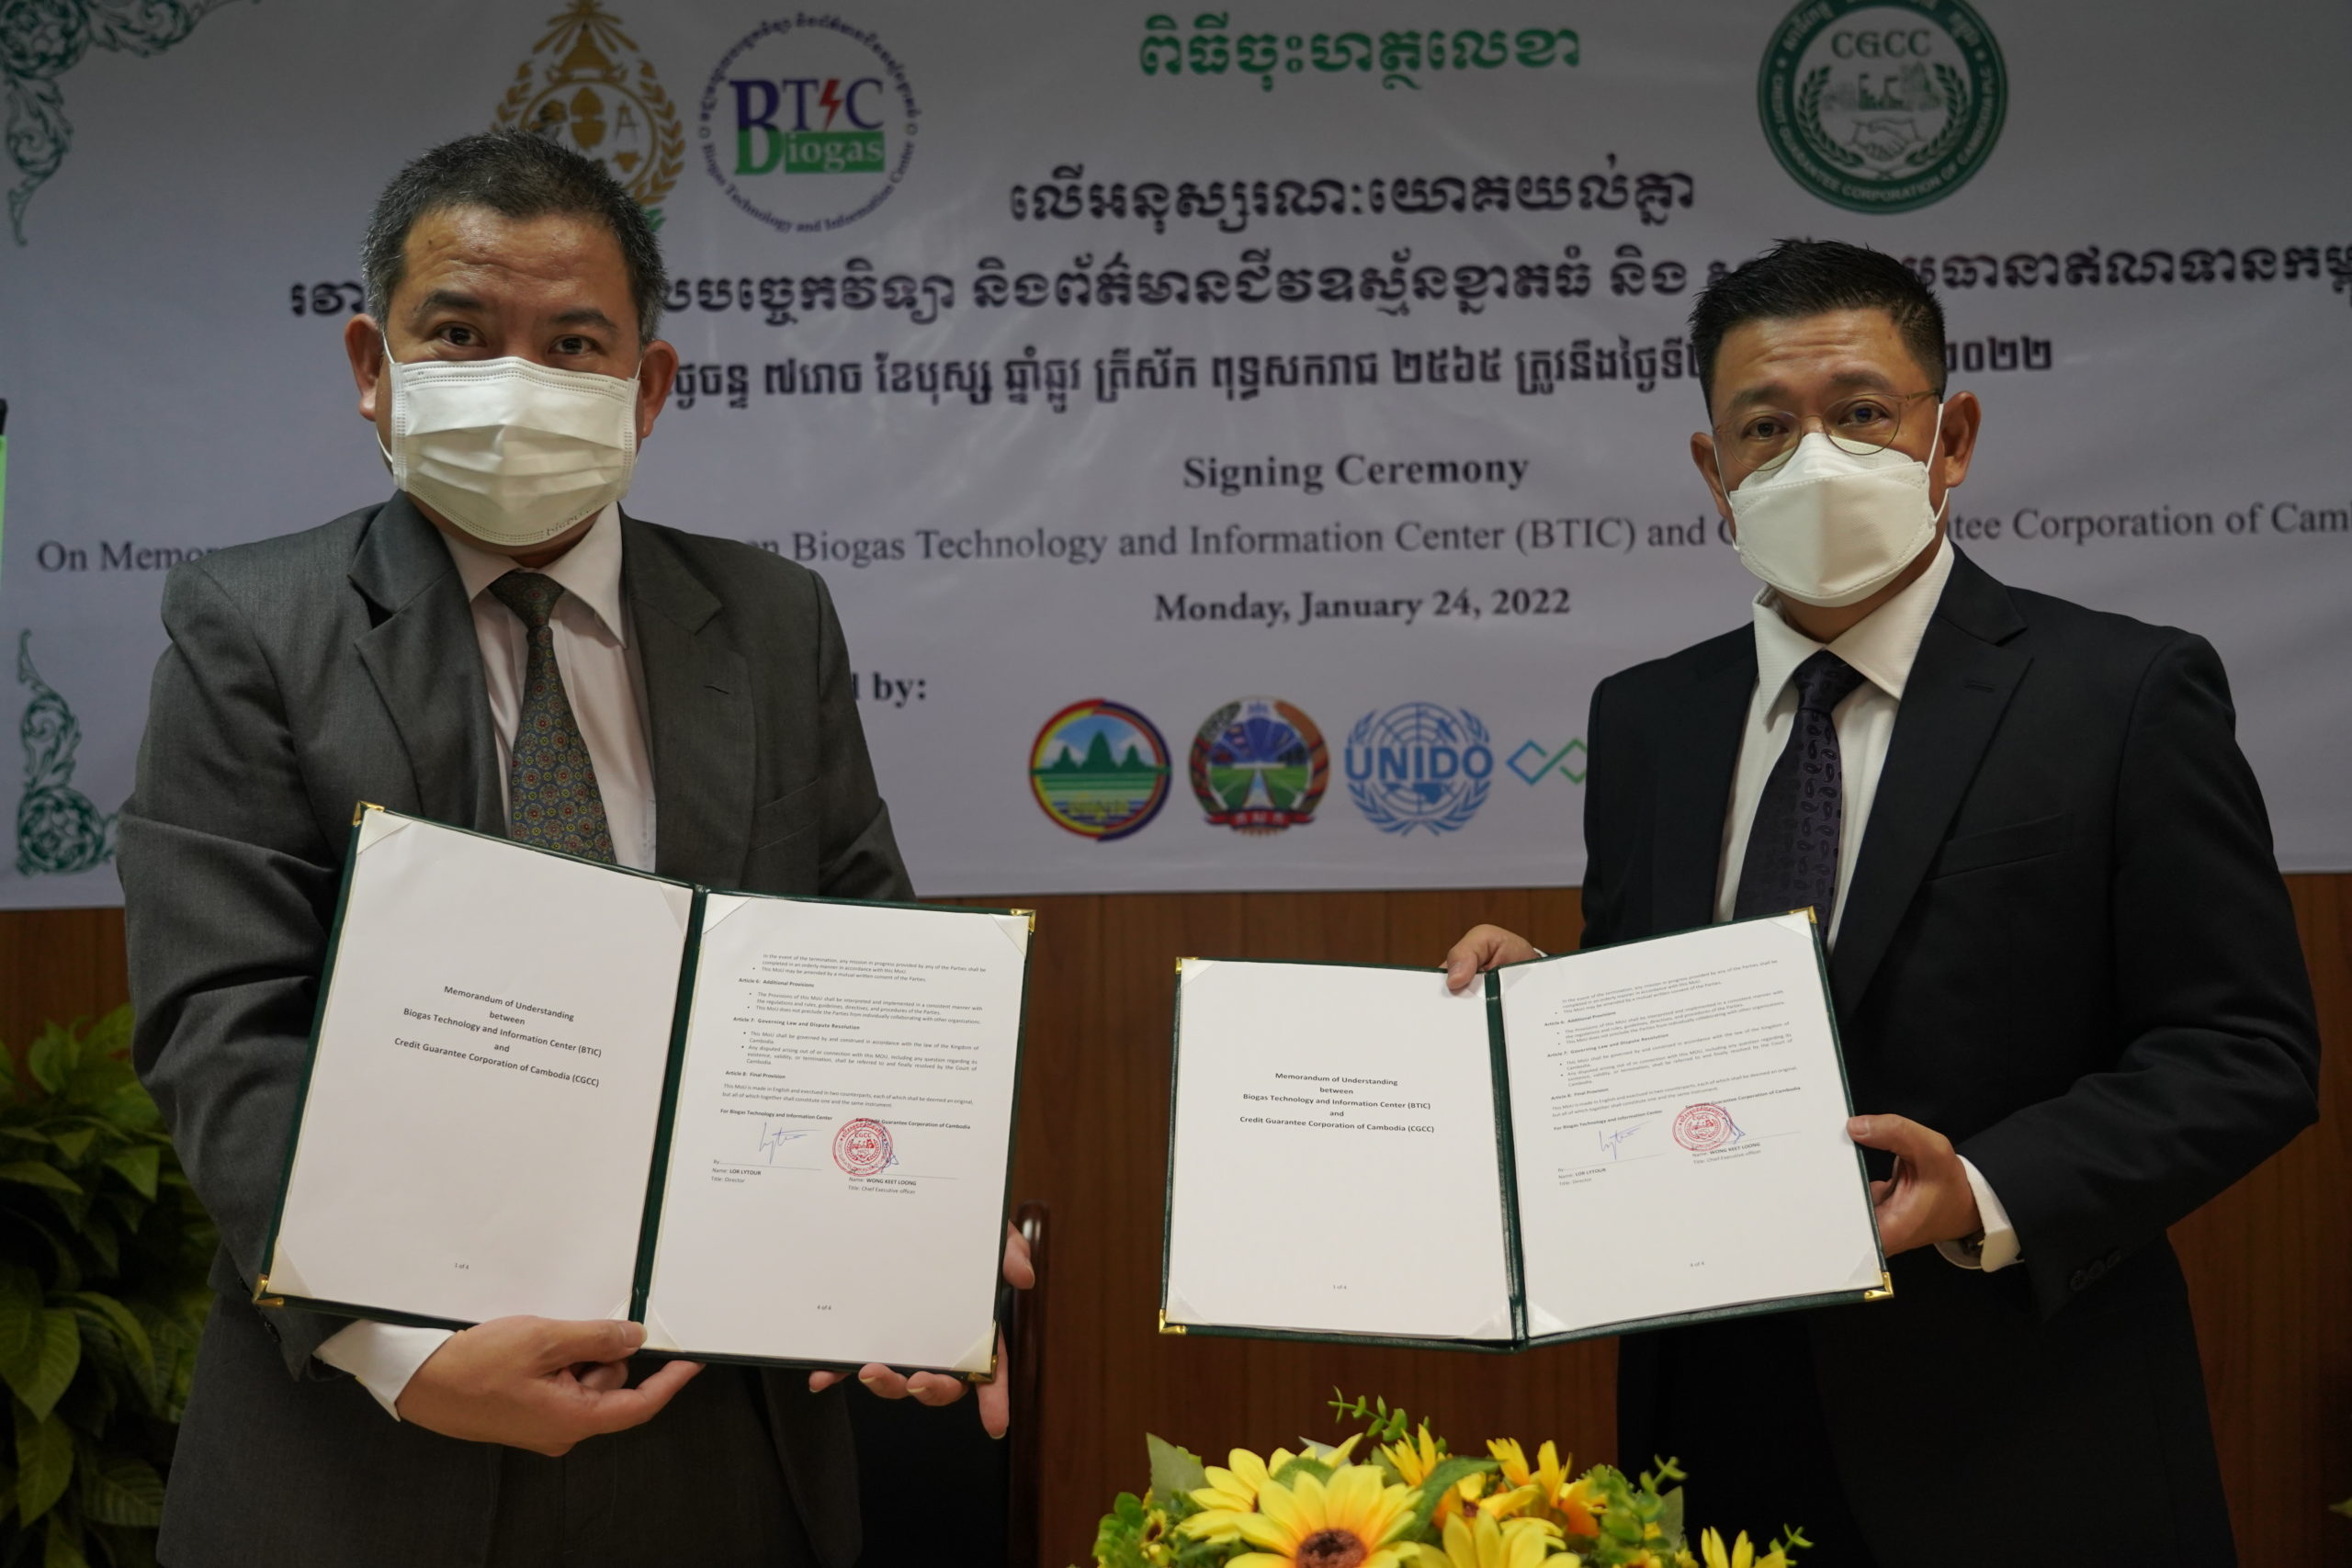 CGCC, BTIC and UNIDO Established Strategic Partnership Promoting Commercial Biogas Technologies in Cambodia to Combat Climate Change